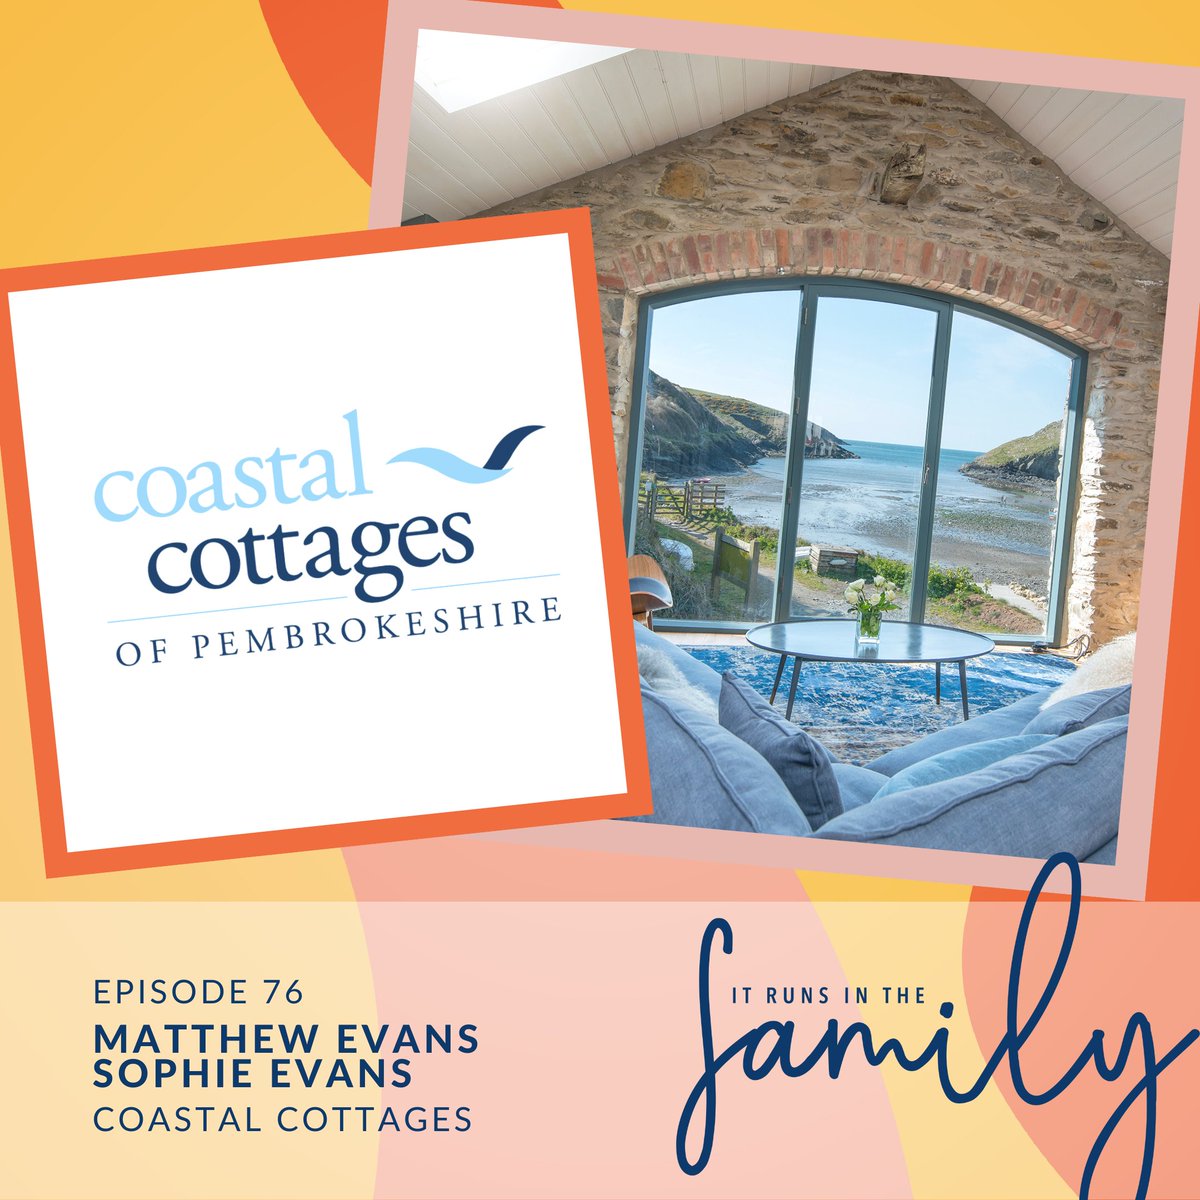 Pembrokeshire is a stunning stretch of Welsh coastline whose beauty should sell itself, but it’s Coastal Cottages’ community-building that builds the experience around it.

#podcast #businesspodcast #family #familybusiness #coastalcottages #visitpembrokeshire #visitwales